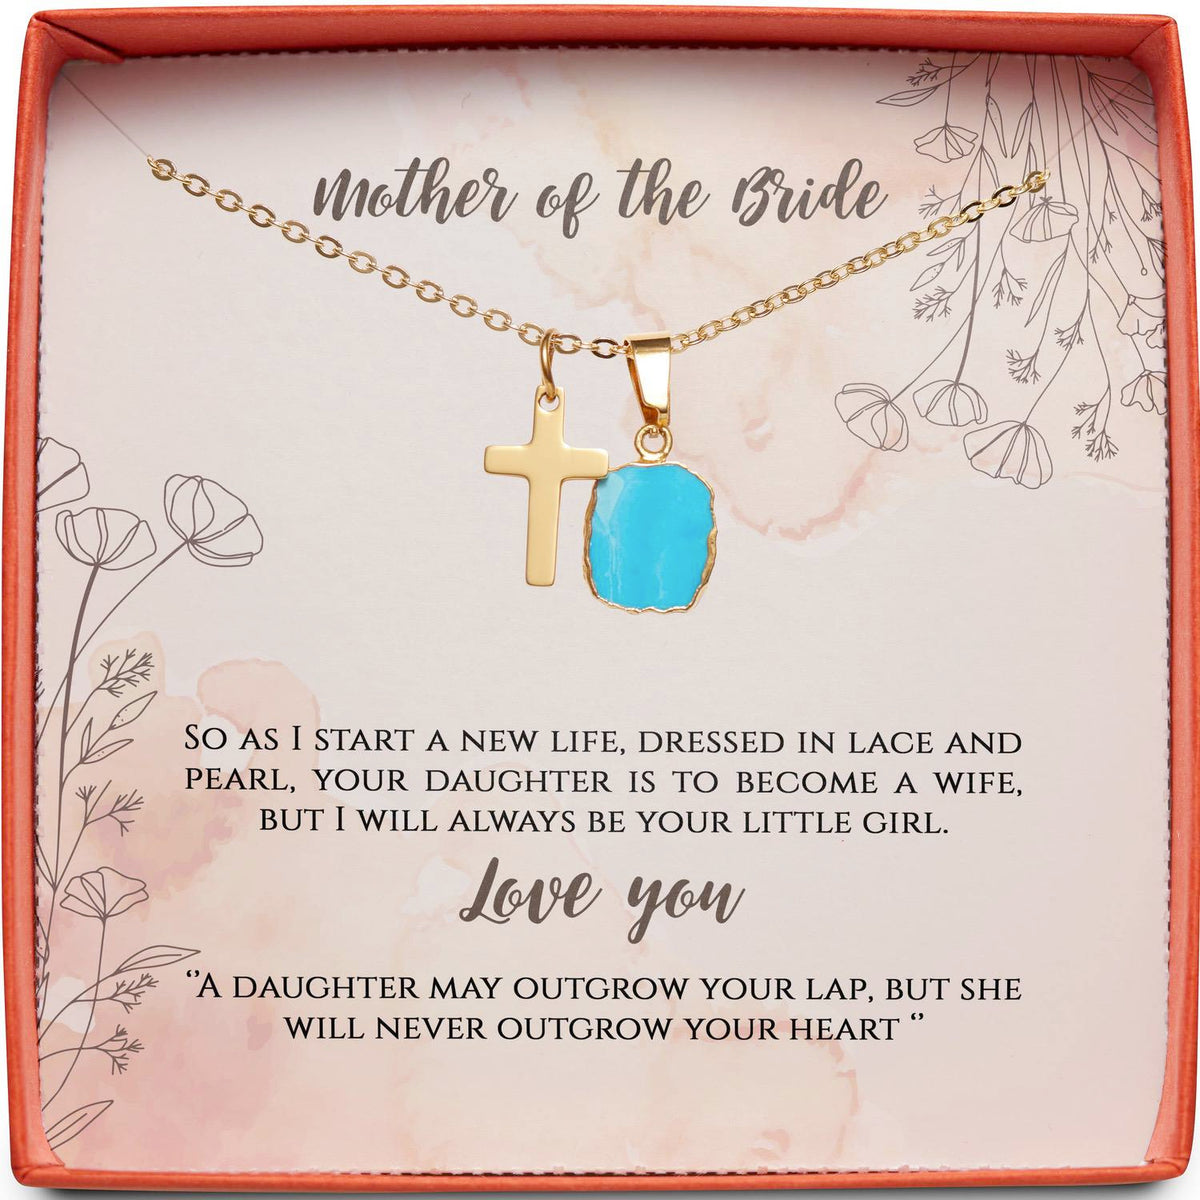 Mother of the Bride (From Daughter) | Dressed in Lace and Pearl | Cross Necklace